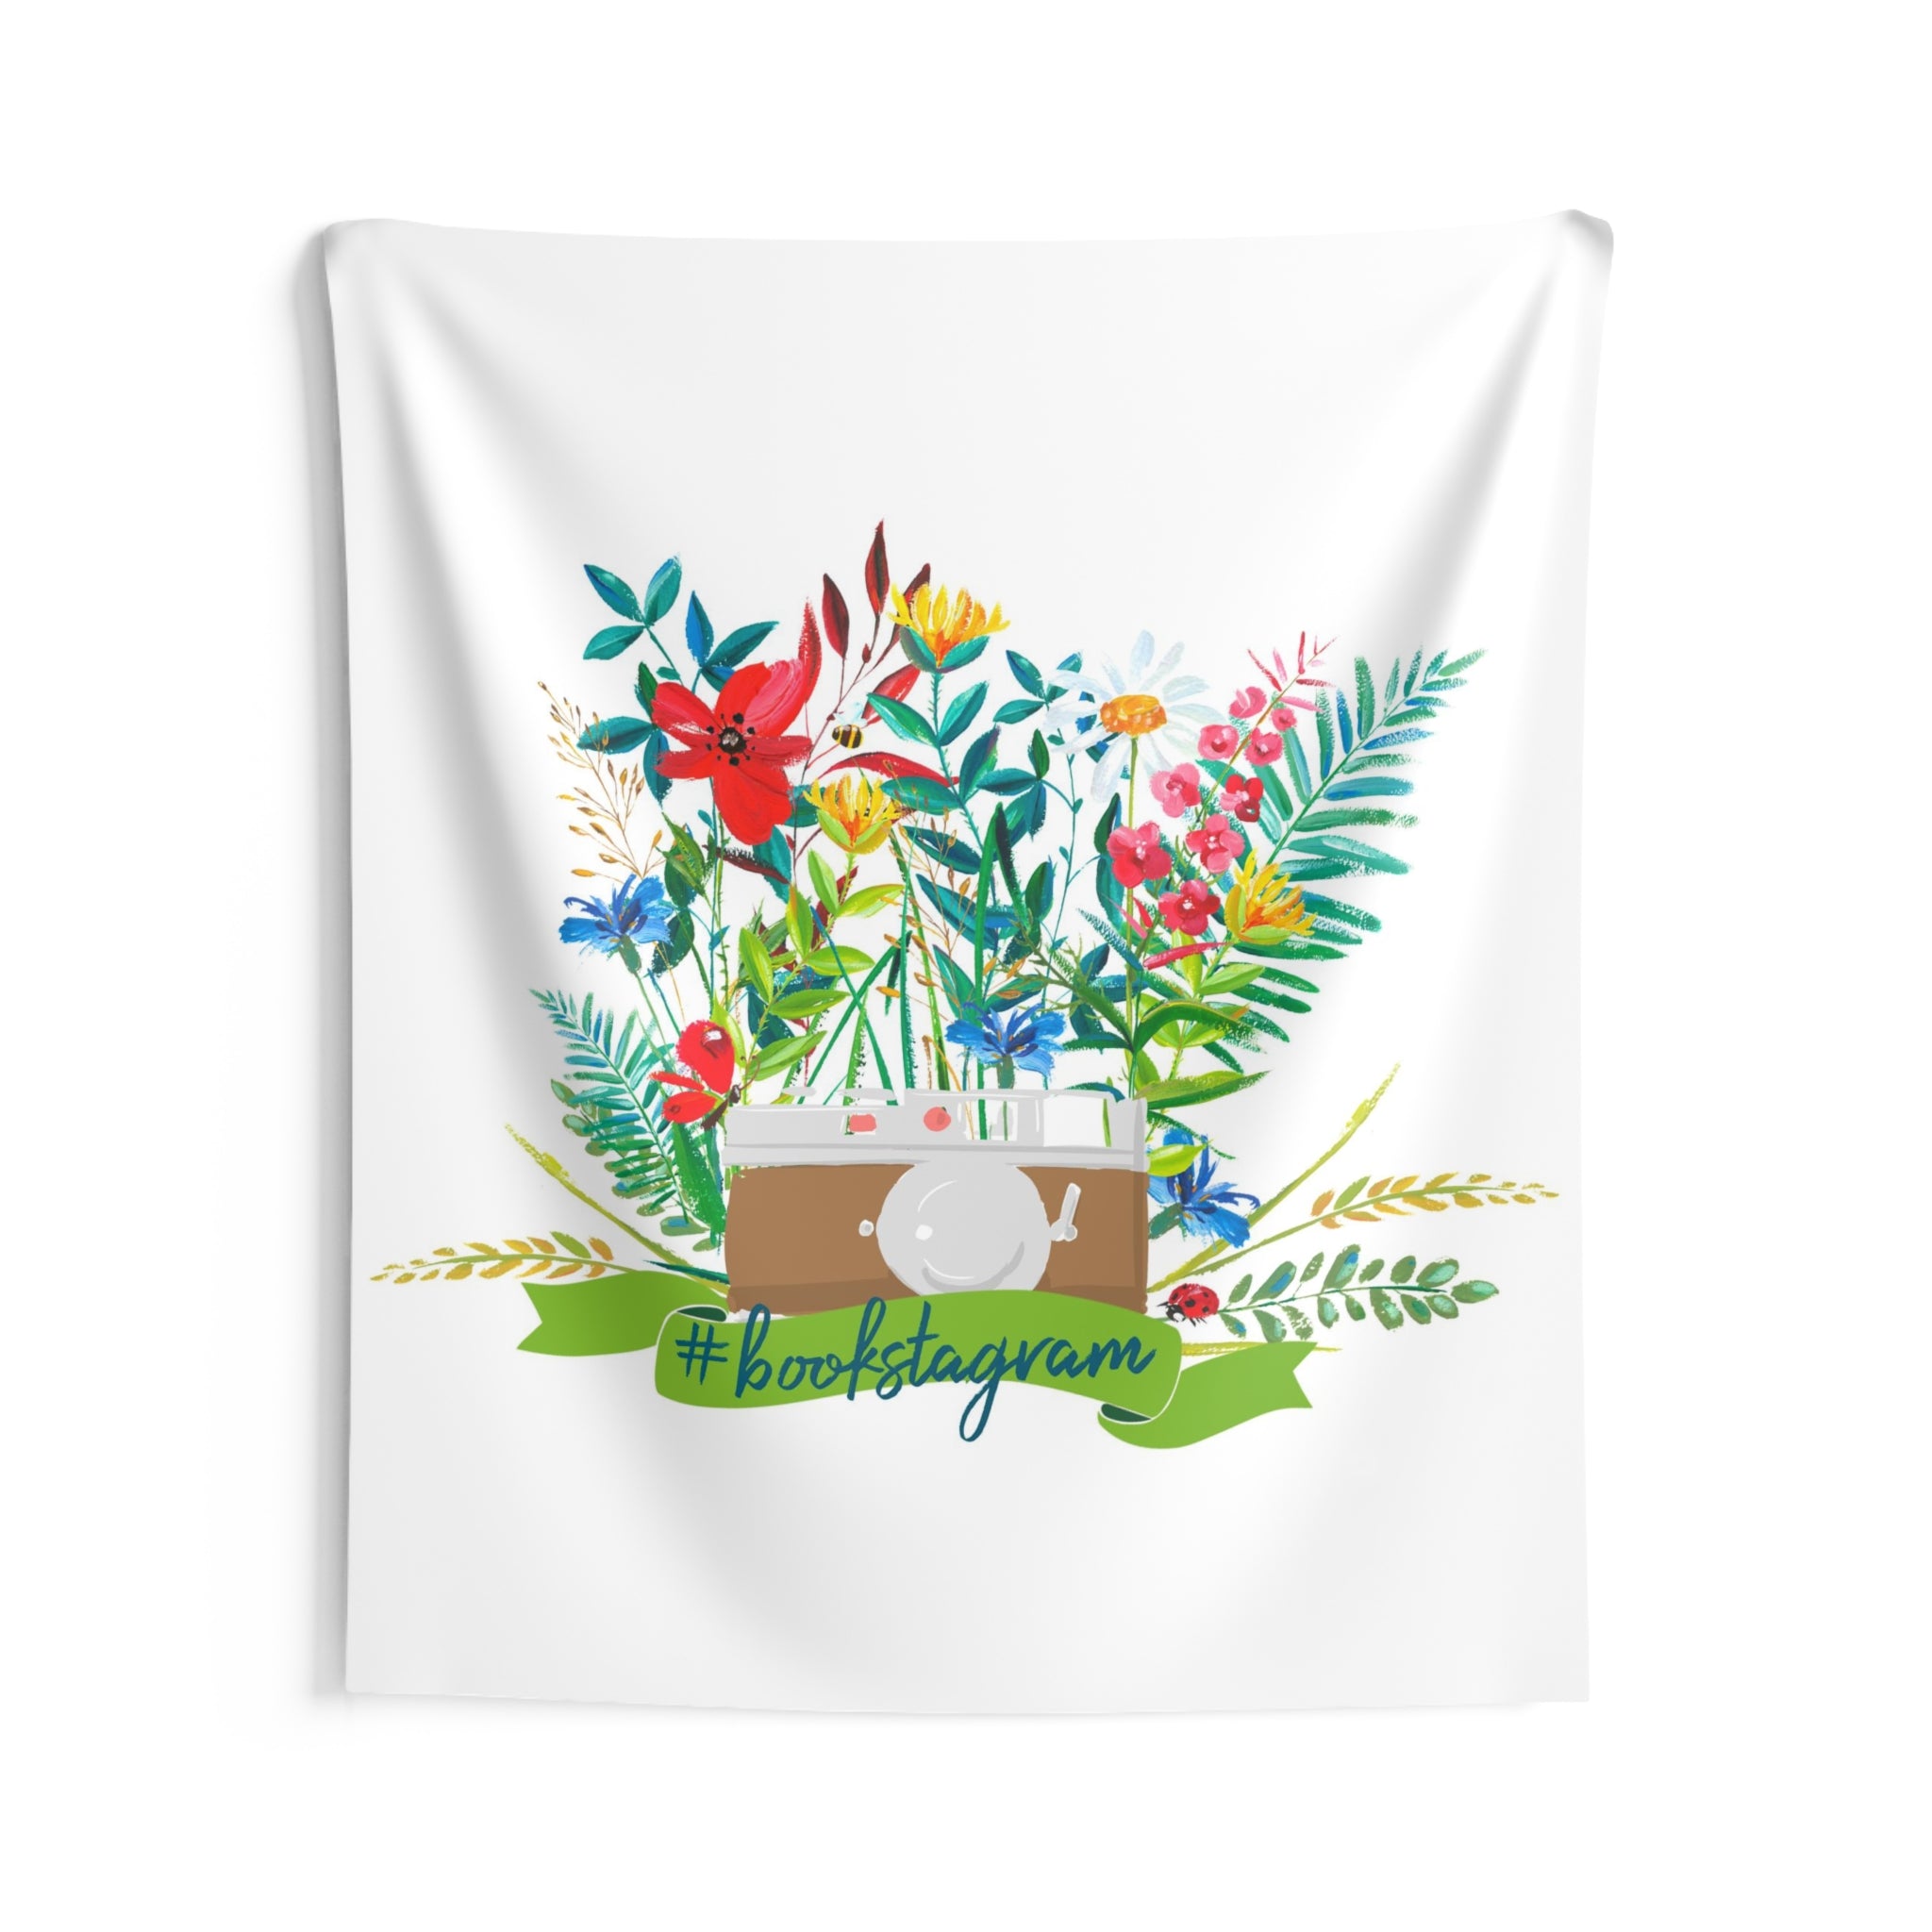 #bookstagram Floral Wall Tapestry - Literary Lifestyle Company